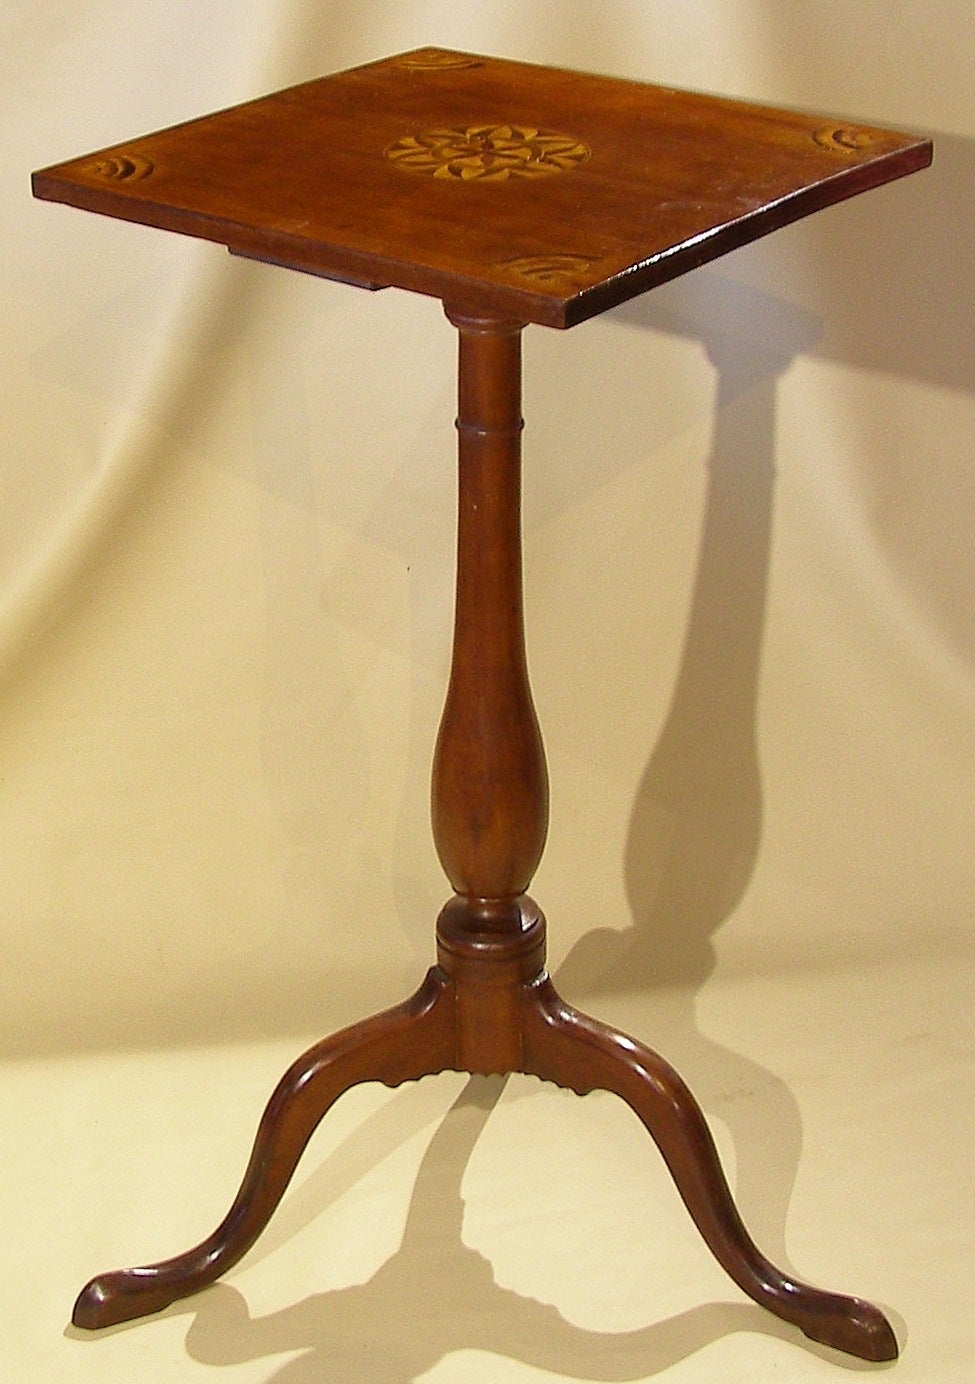 American Federal Period Inlaid Cherry Candle Stand